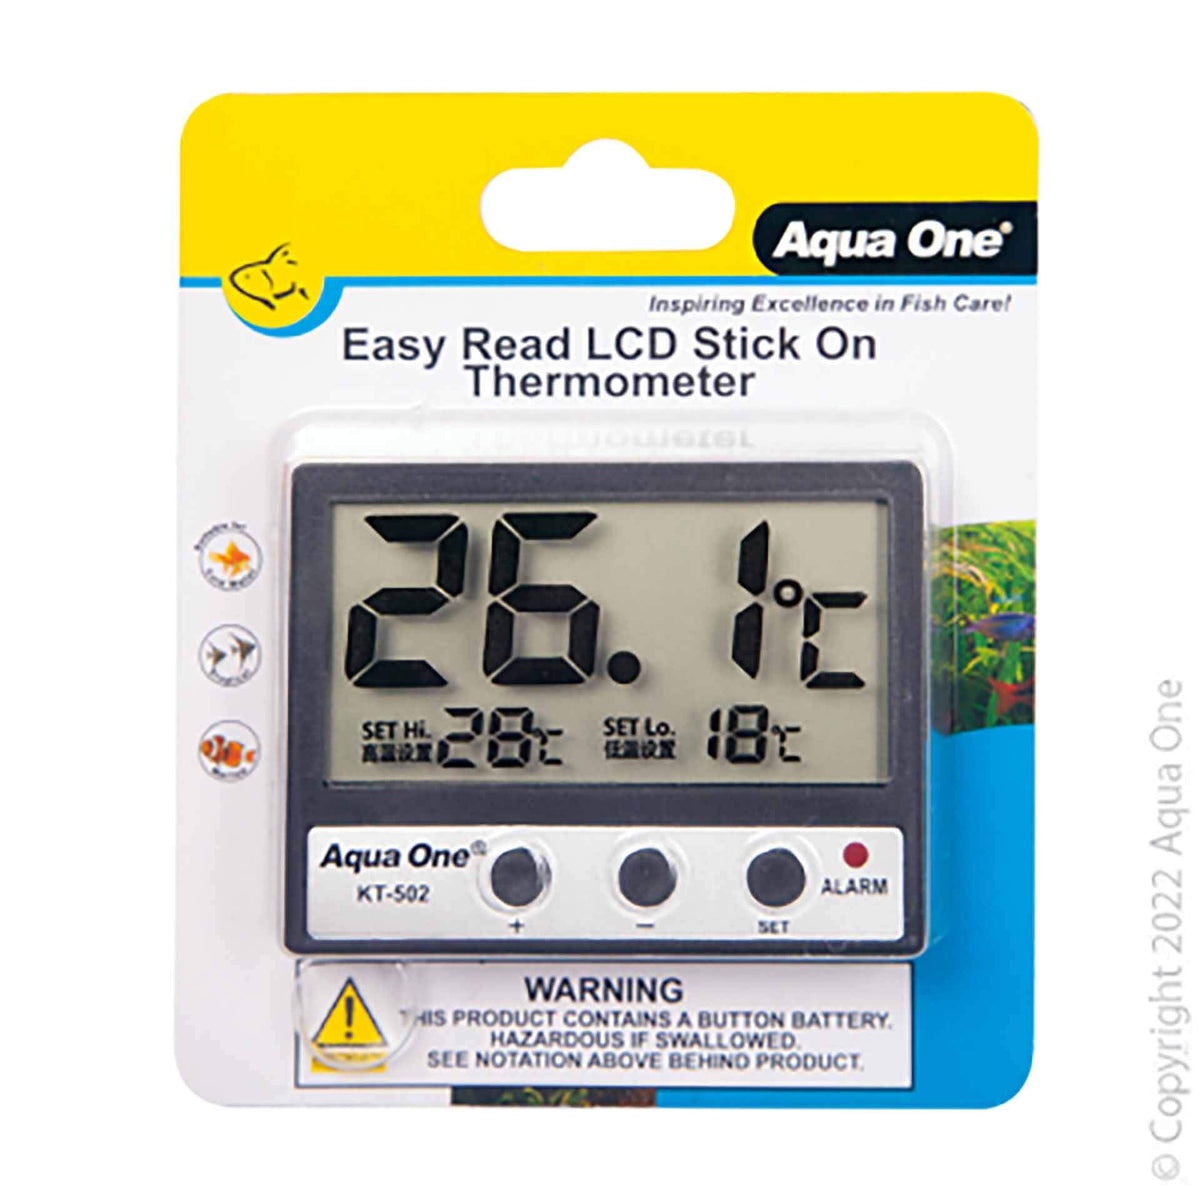 Aqua One Easy Read LCD Stick On Thermometer